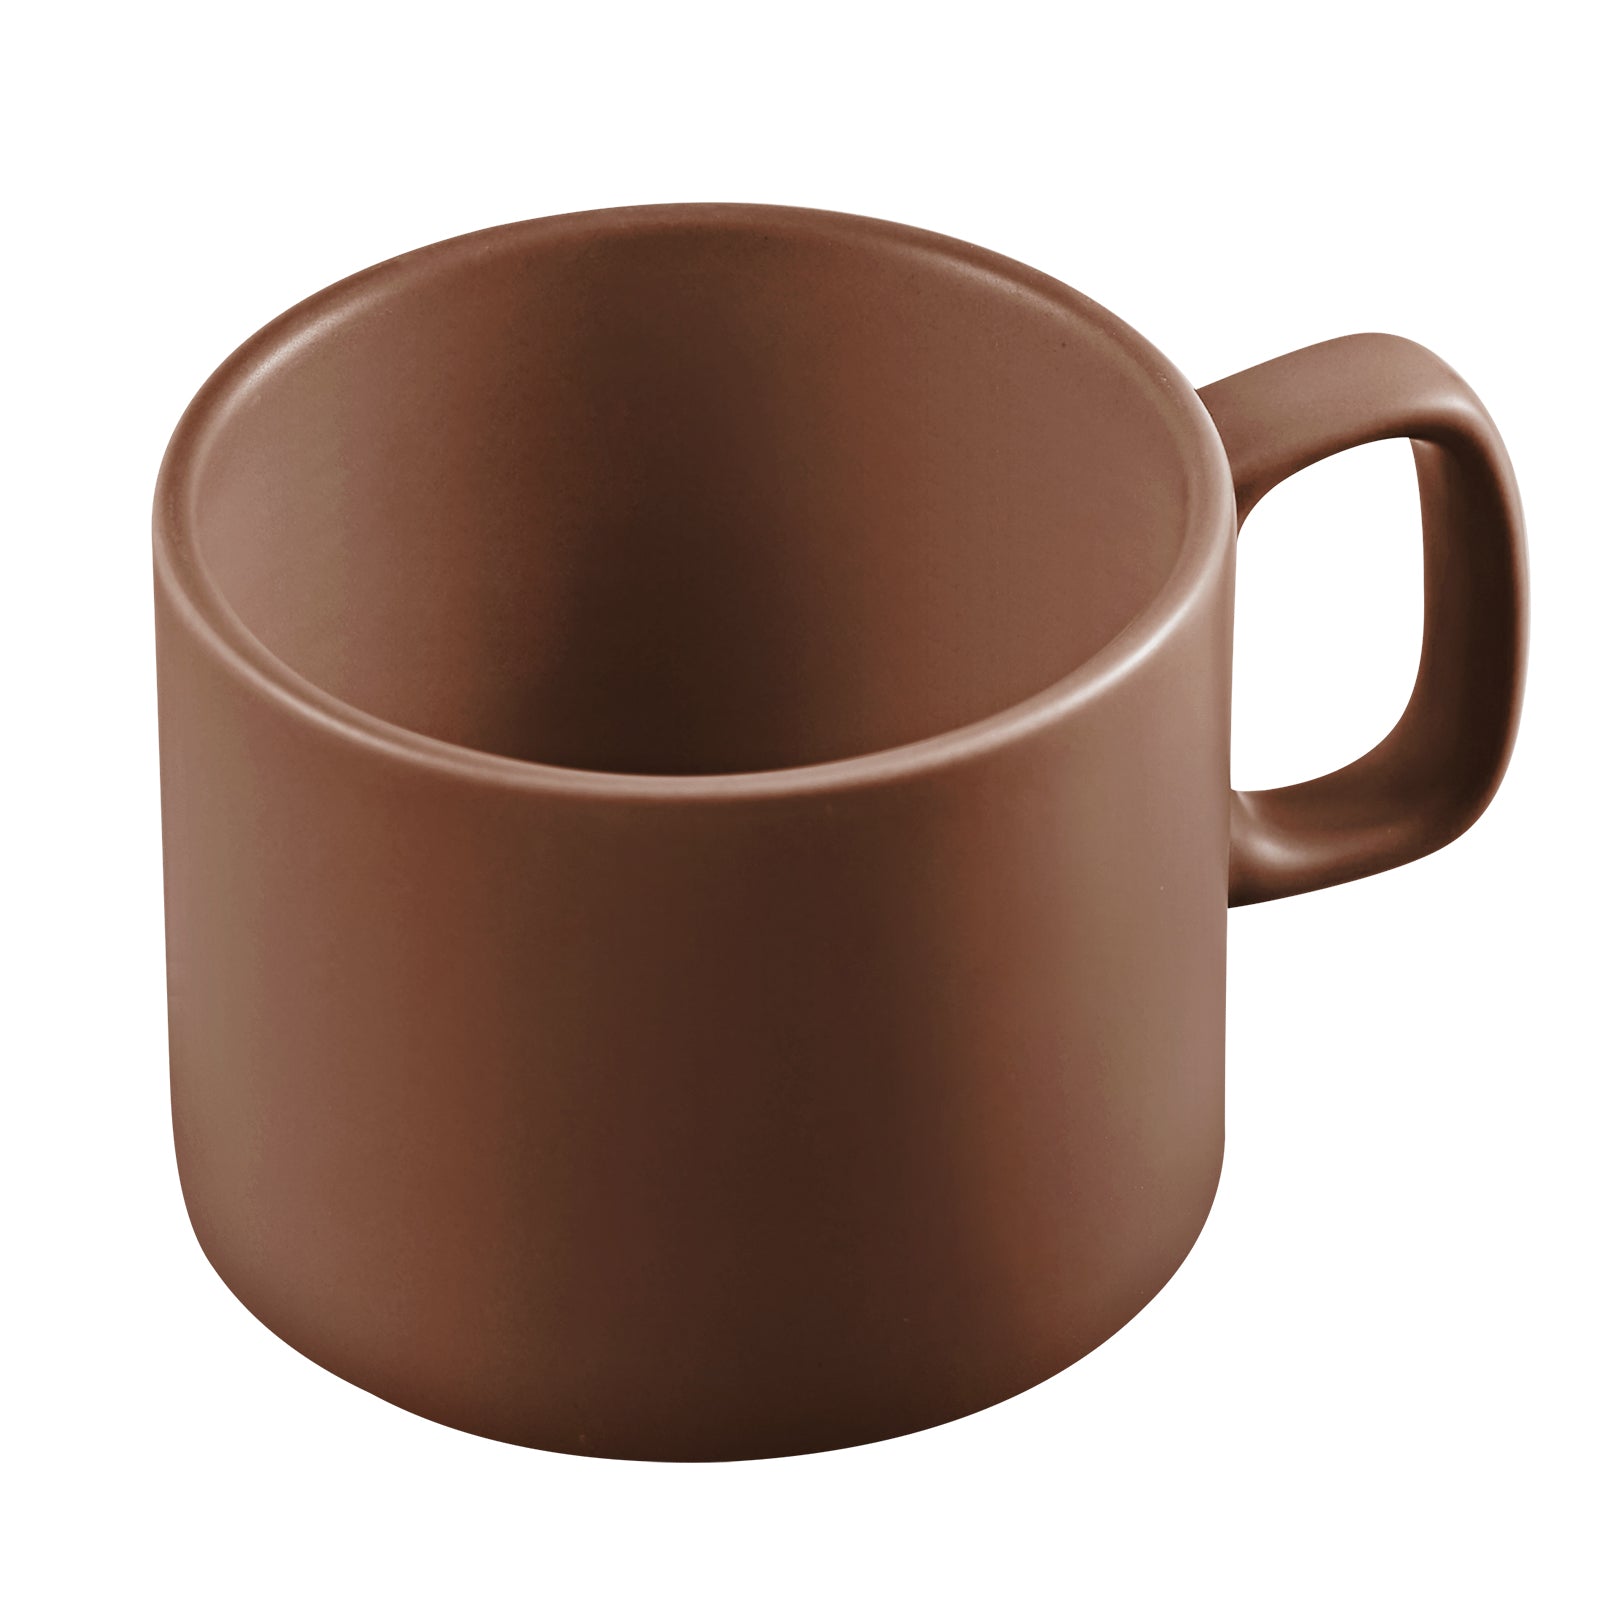 VOBAGA 11 oz Beverages Cup Coffee Mug Tea Cup with Flat-Bottom Warming Coffee Milk for Office and Home ( Brown)